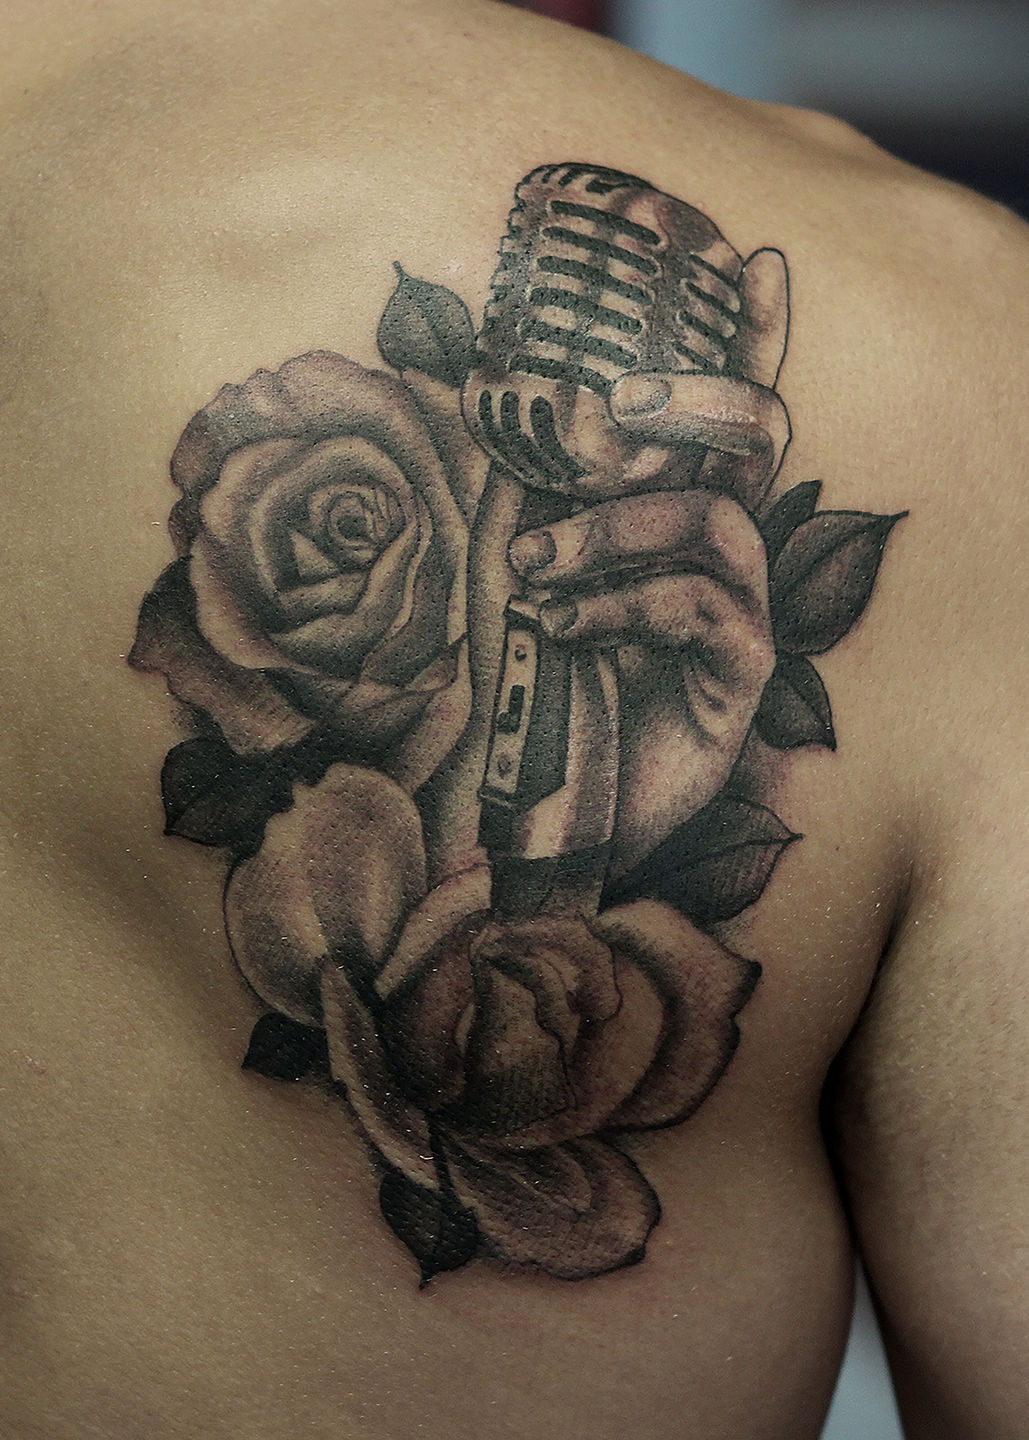 Pete_microphone_roses